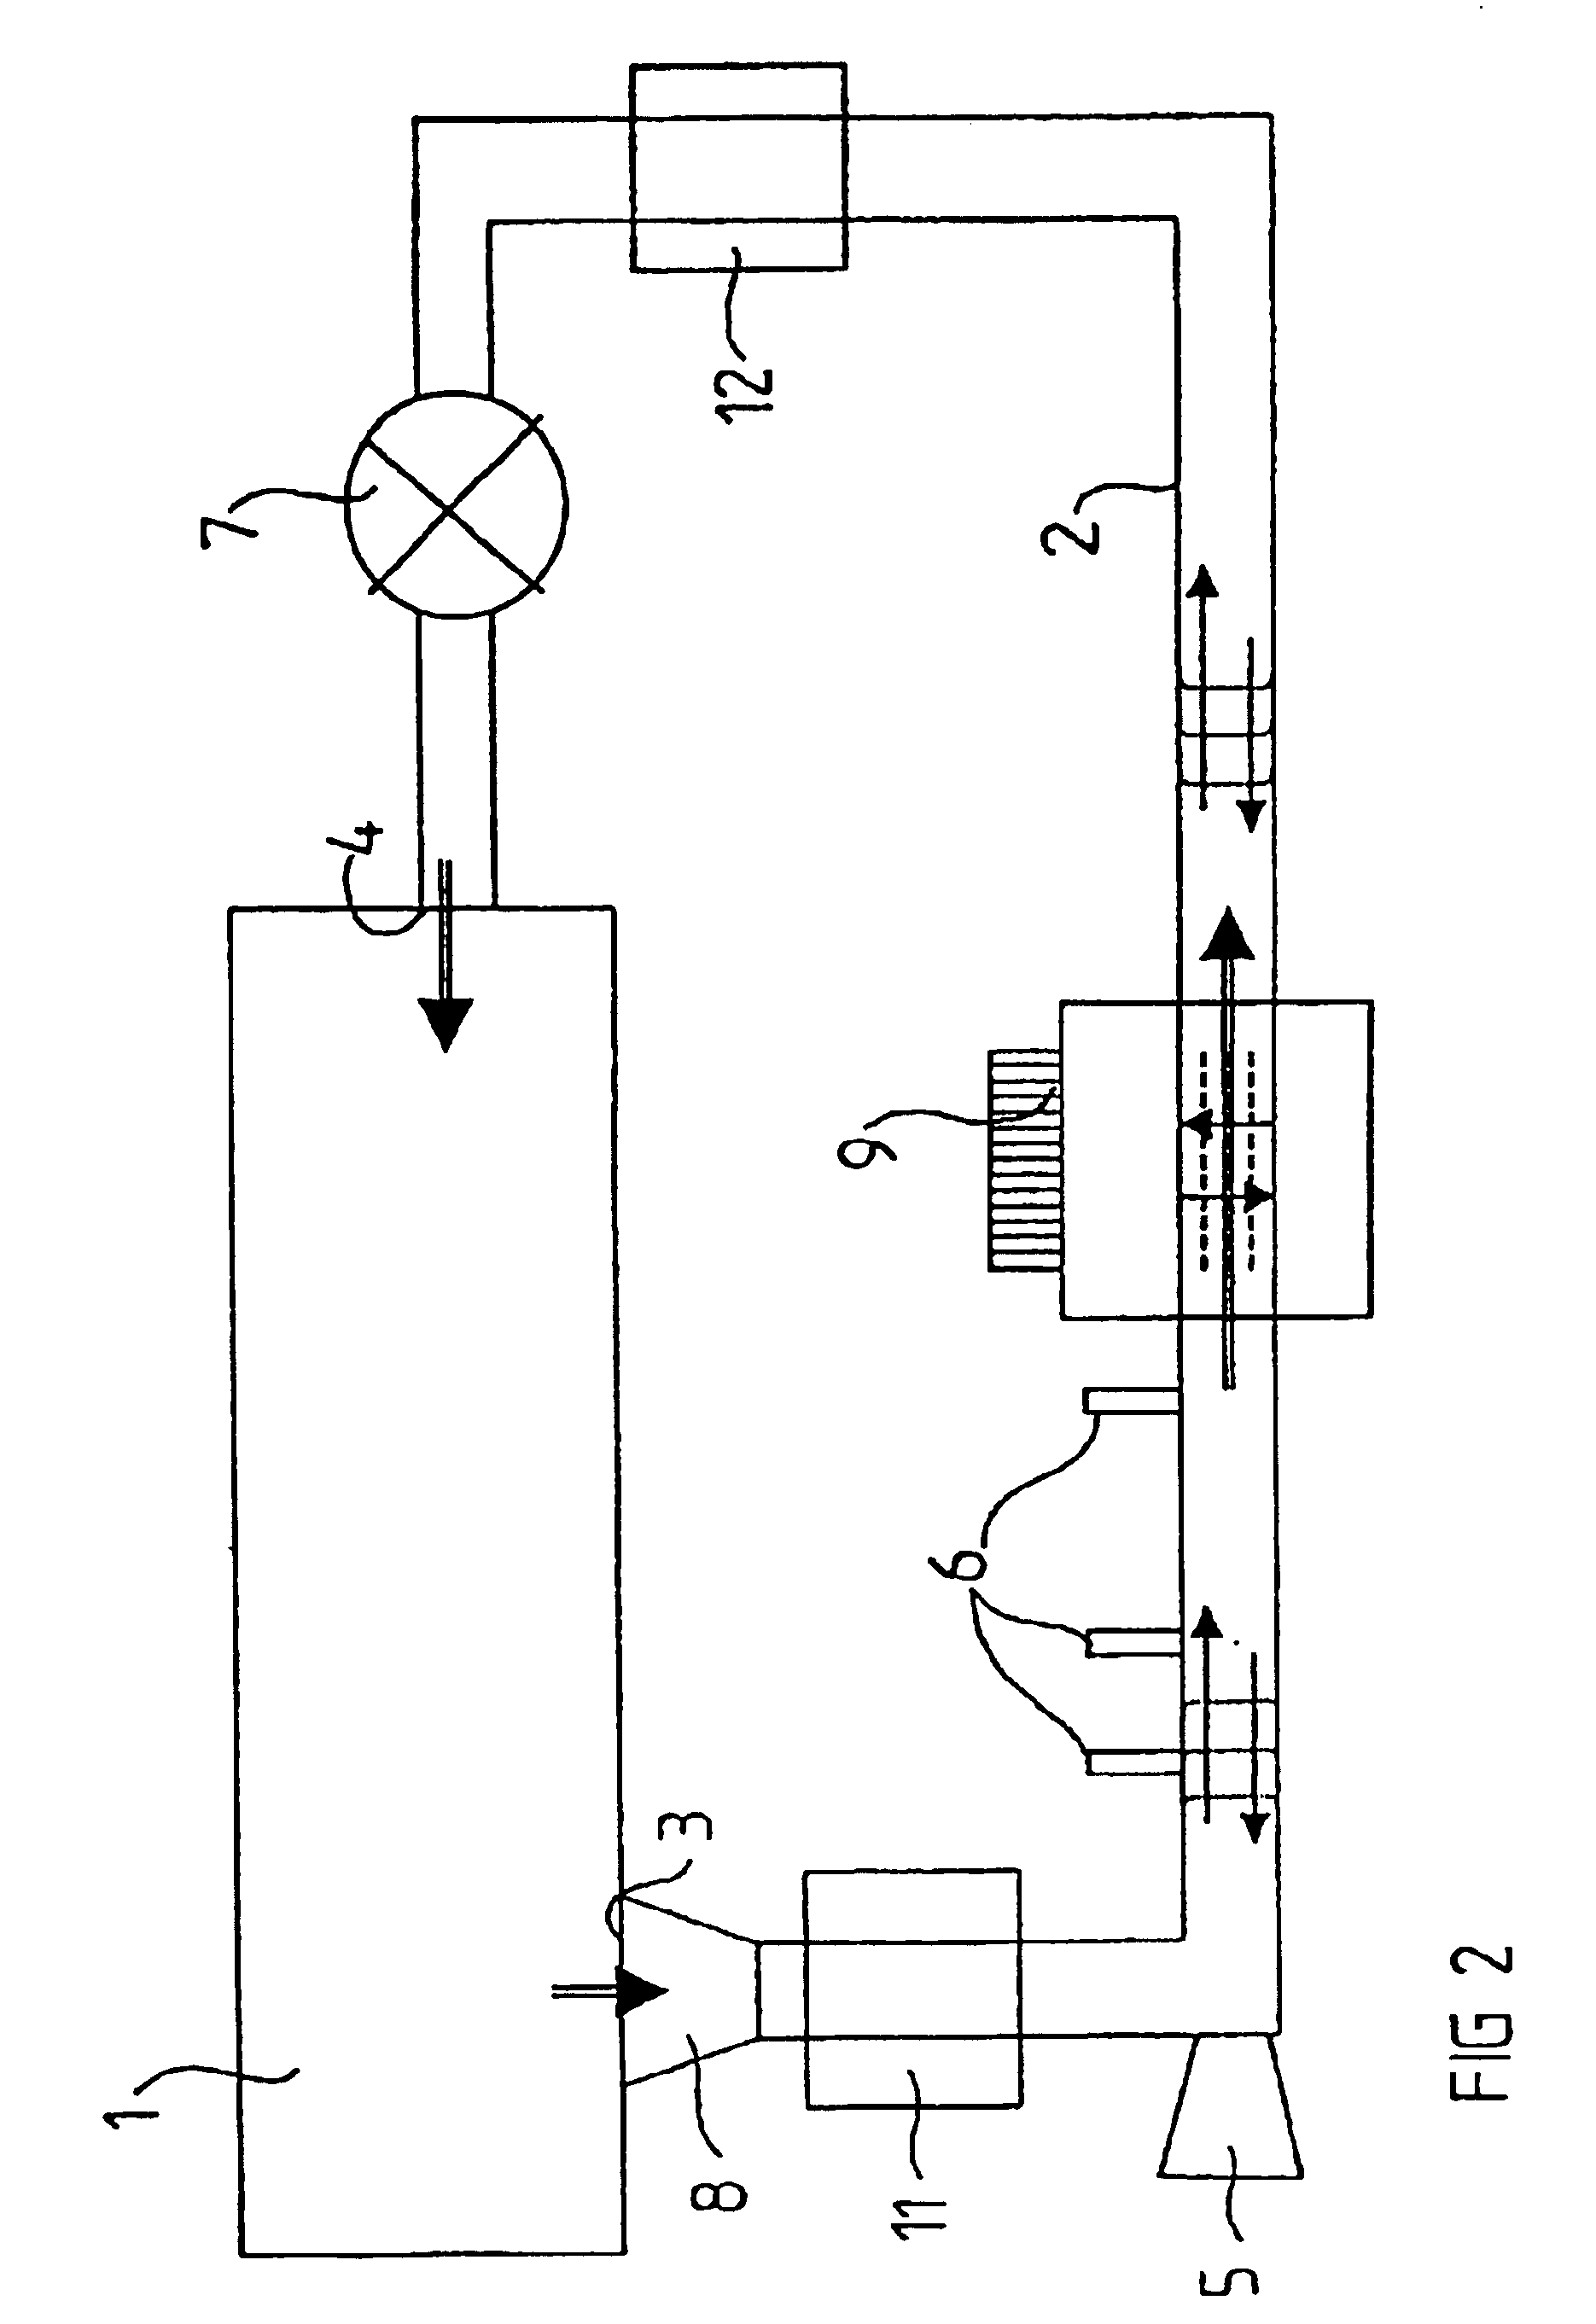 Method and device for monitoring and controlling a process